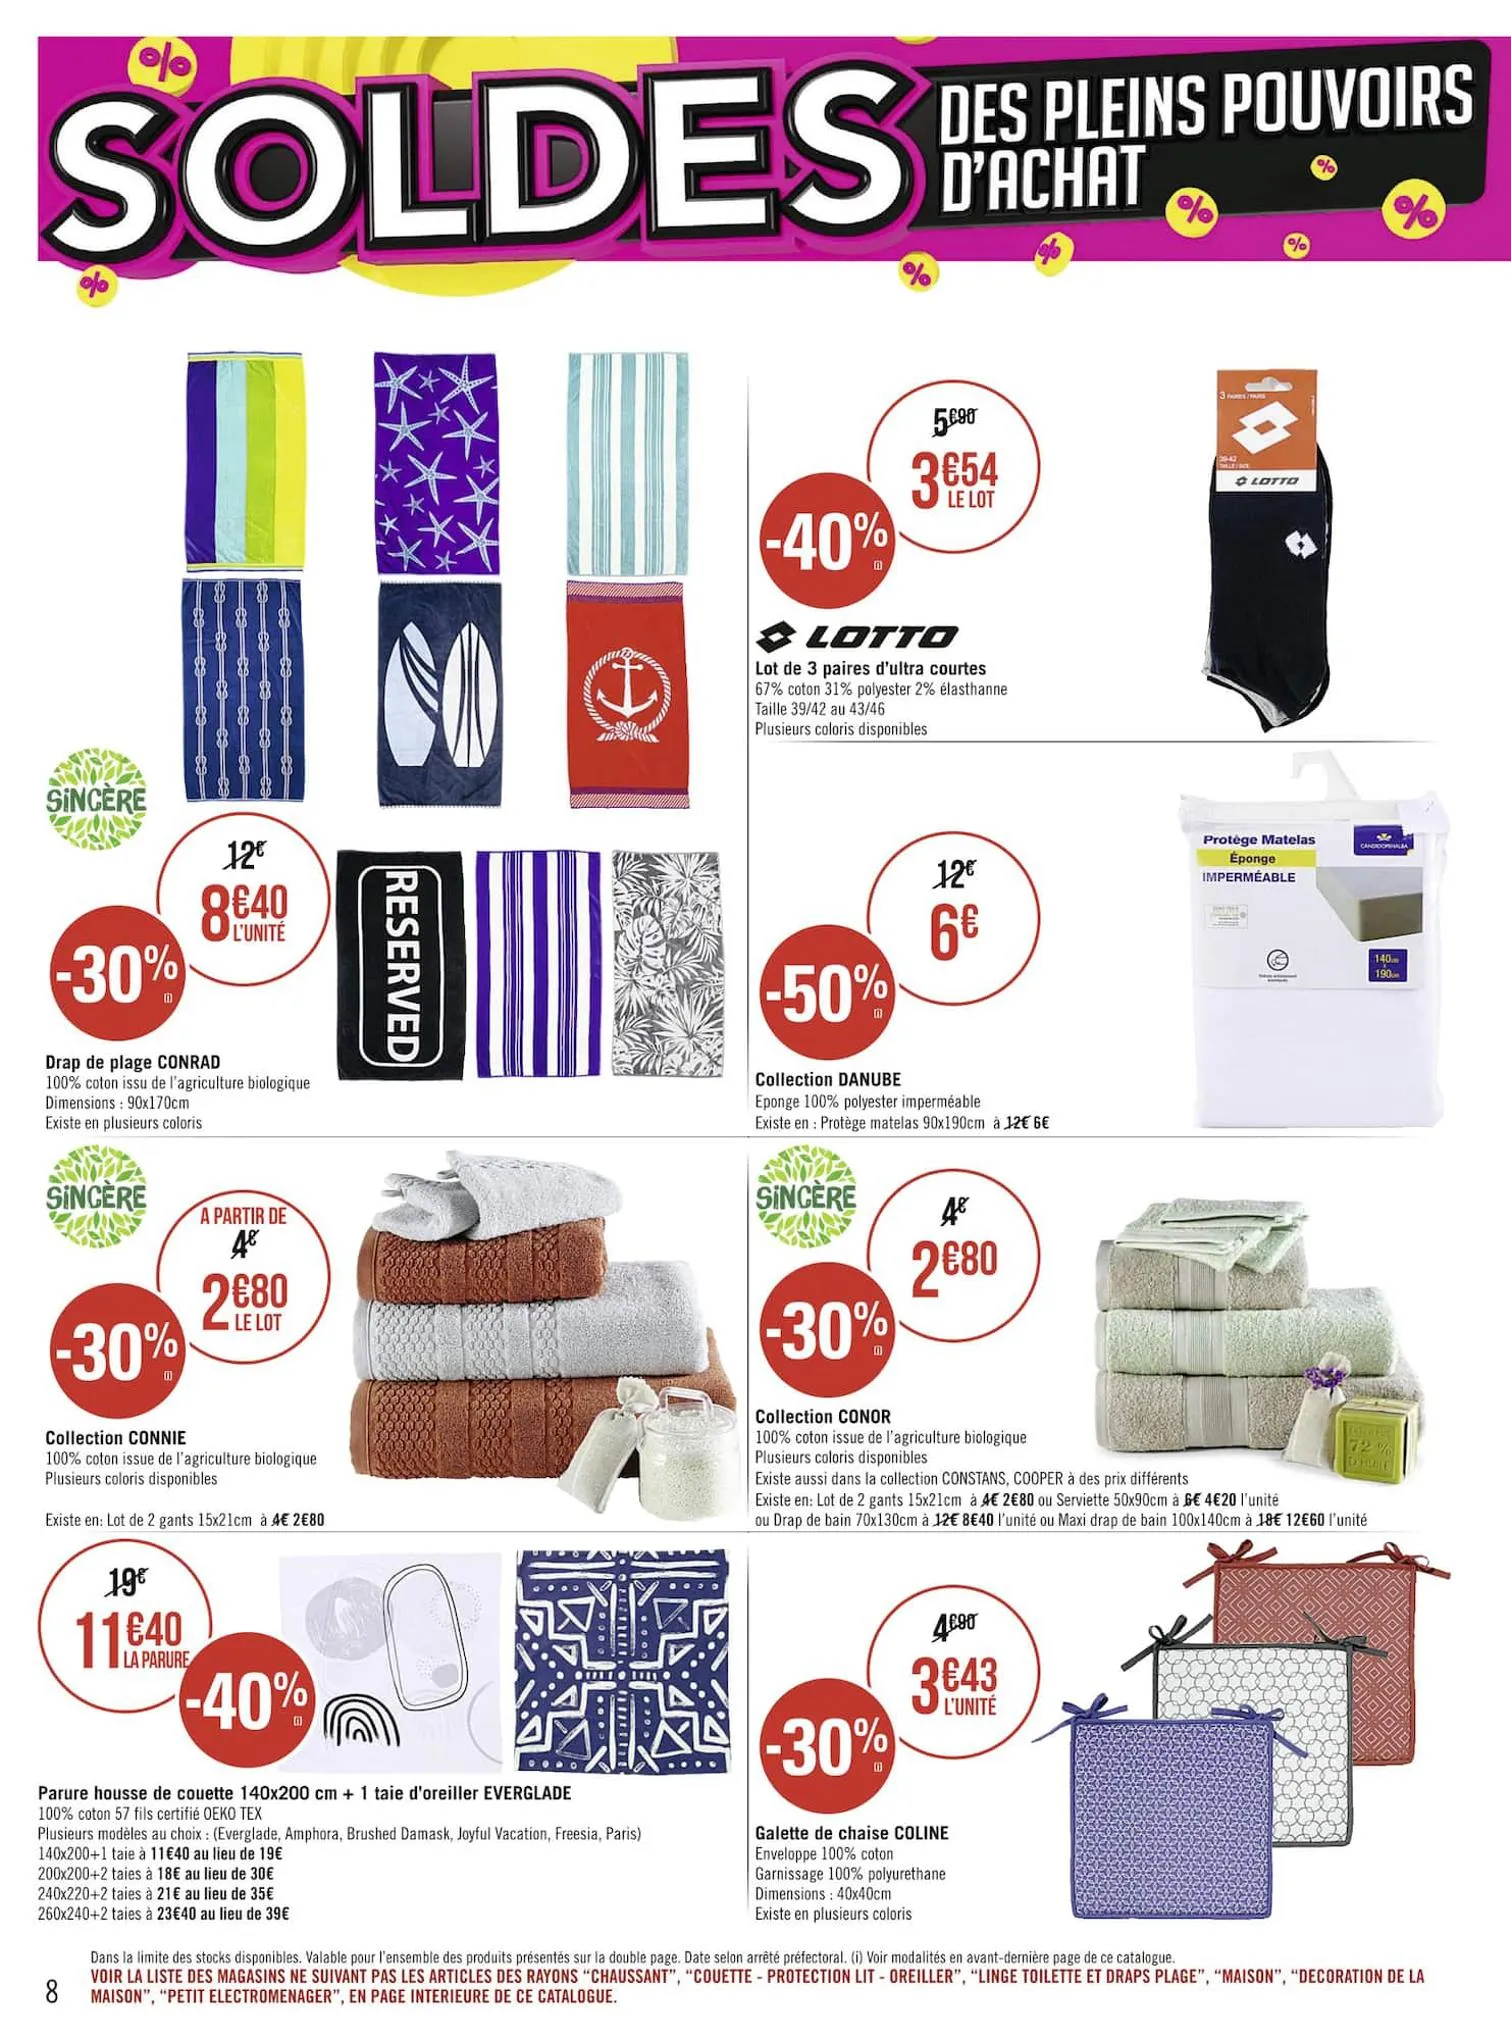 Catalogue SOLDES, page 00008